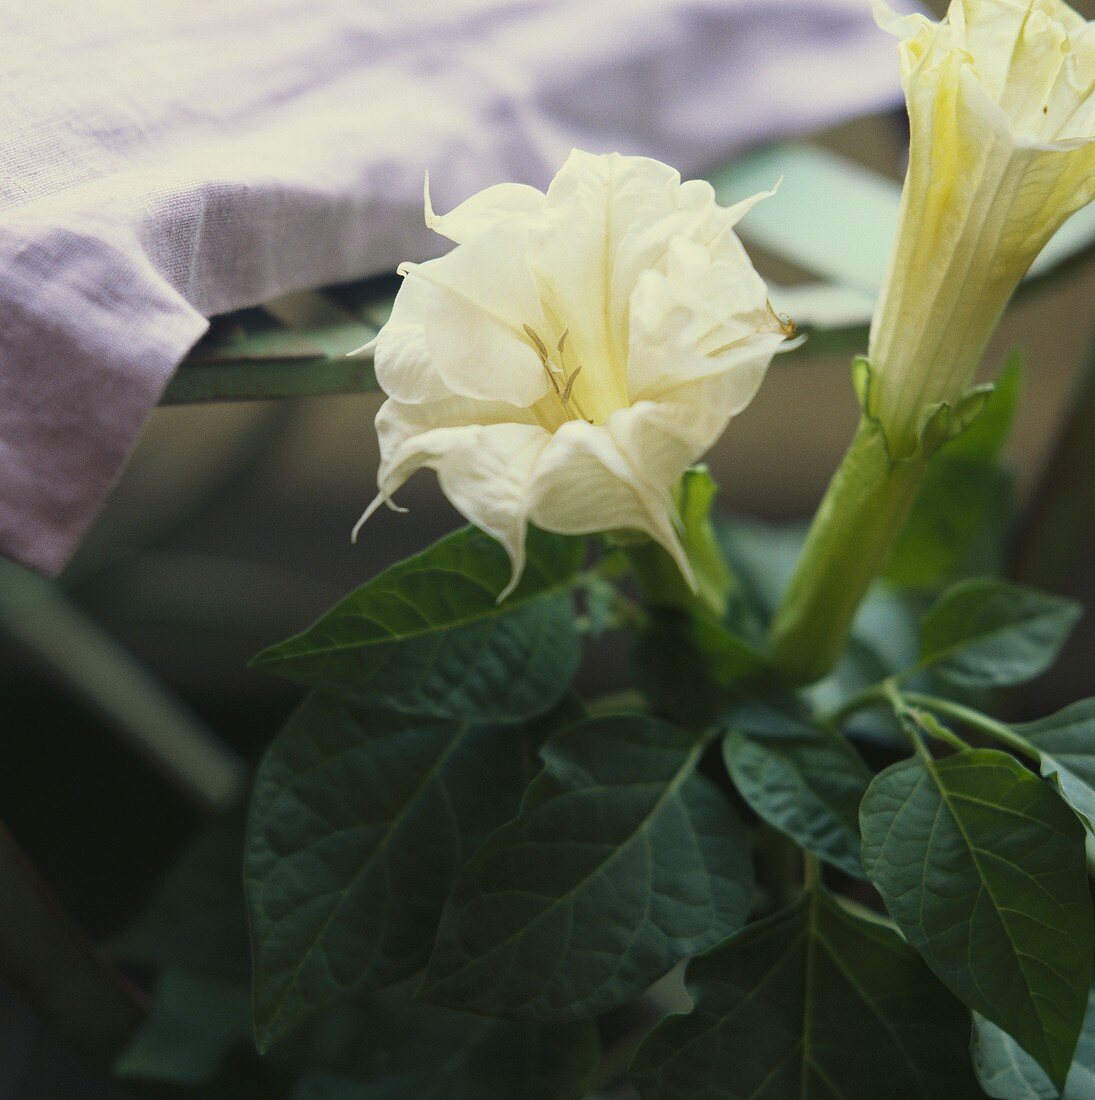 Angel's trumpet (Datura) with white flowers